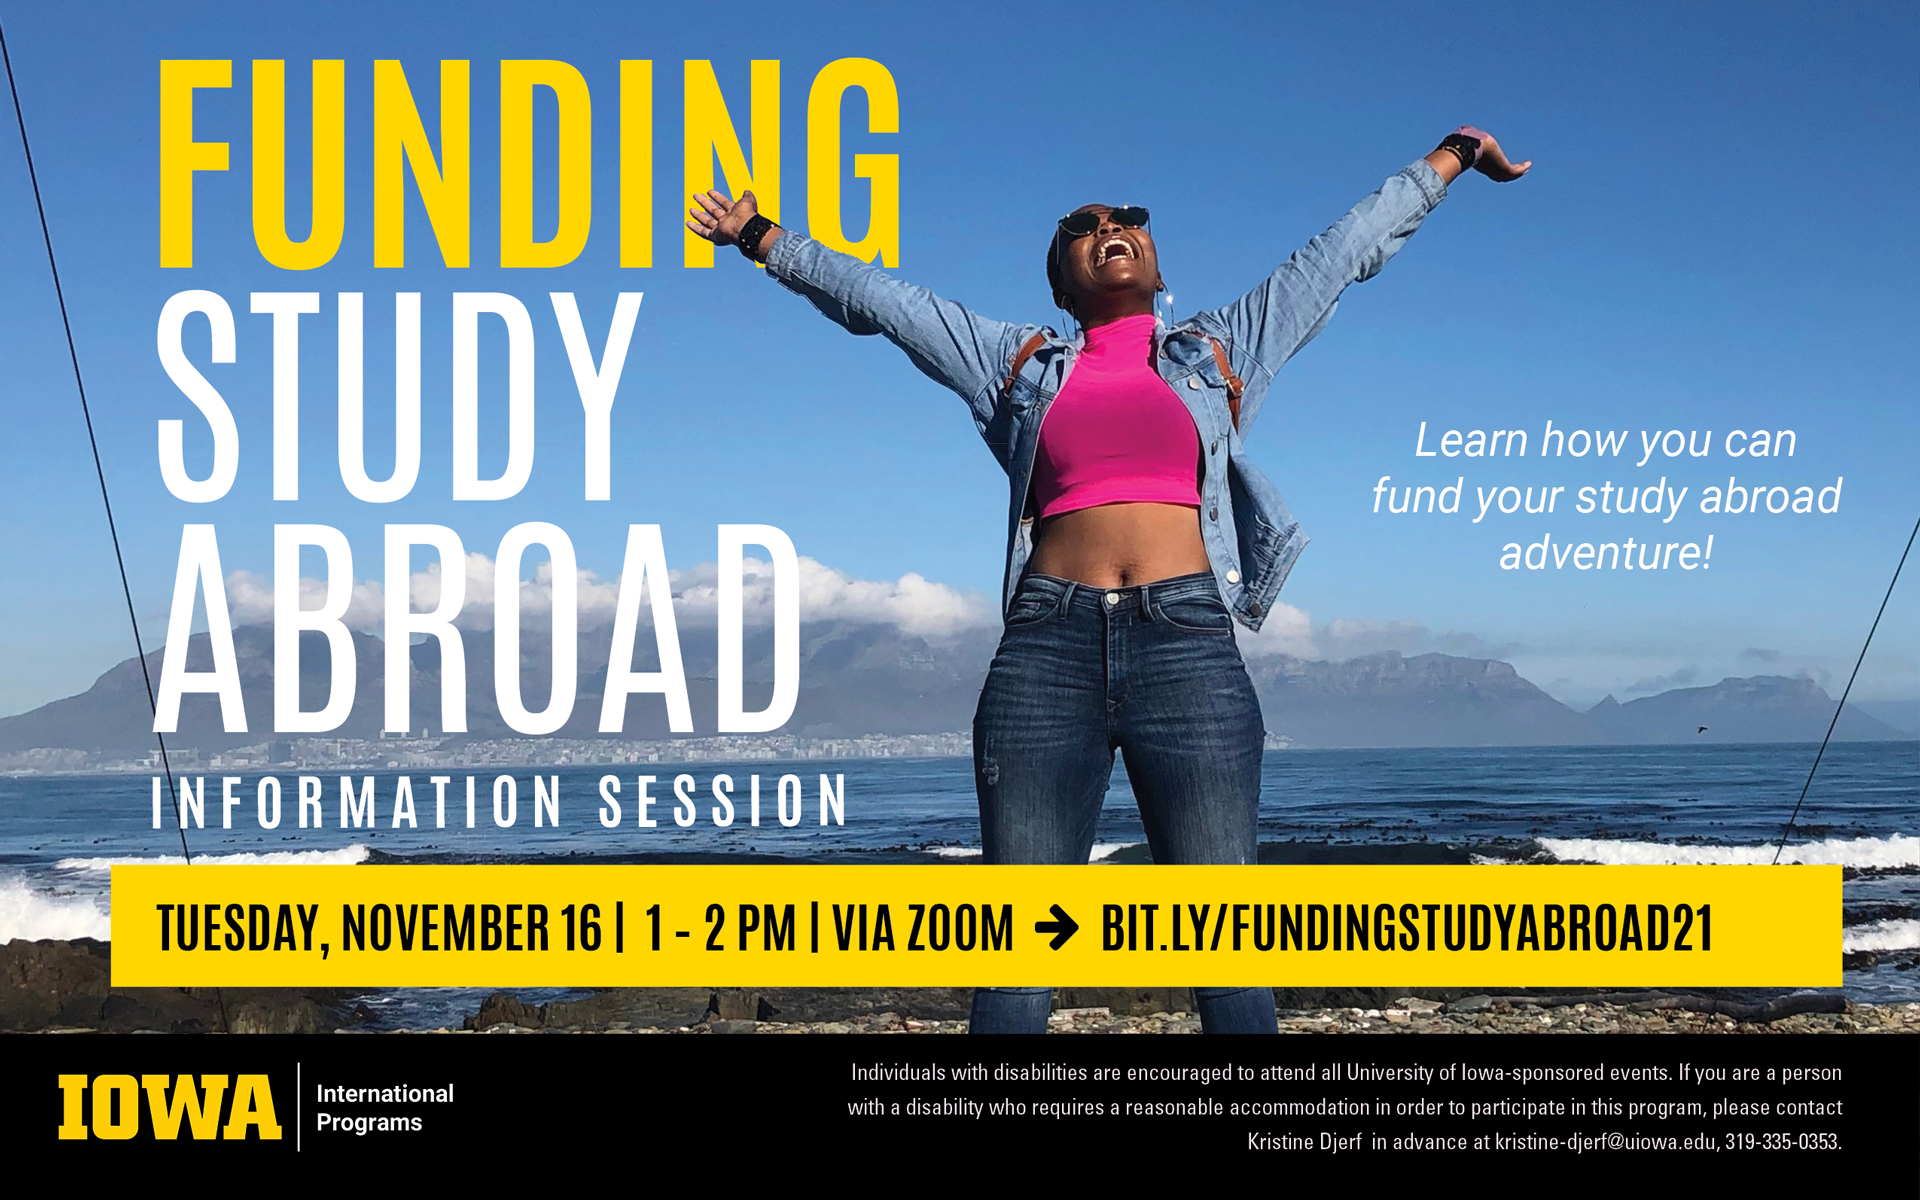 An image of a person throwing their arms up in celebration on what appears to be a beach, with mountains visible behind them. The text reads as follows: "Funding Study Abroad Information Session. Learn how you can fund your study abroad adventure! Tuesday, November 16, 1-2 PM, via Zoom at bit.ly/FundingStudyAbroad21. Individuals with disabilities are encouraged to attend all University of Iowa-sponsored events. If you are a person with a disability who requires a reasonable accommodation in order to participate in this program, please contact Kristine Djerf in advance at kristine-djerf@uiowa.edu, 319-335-0353."